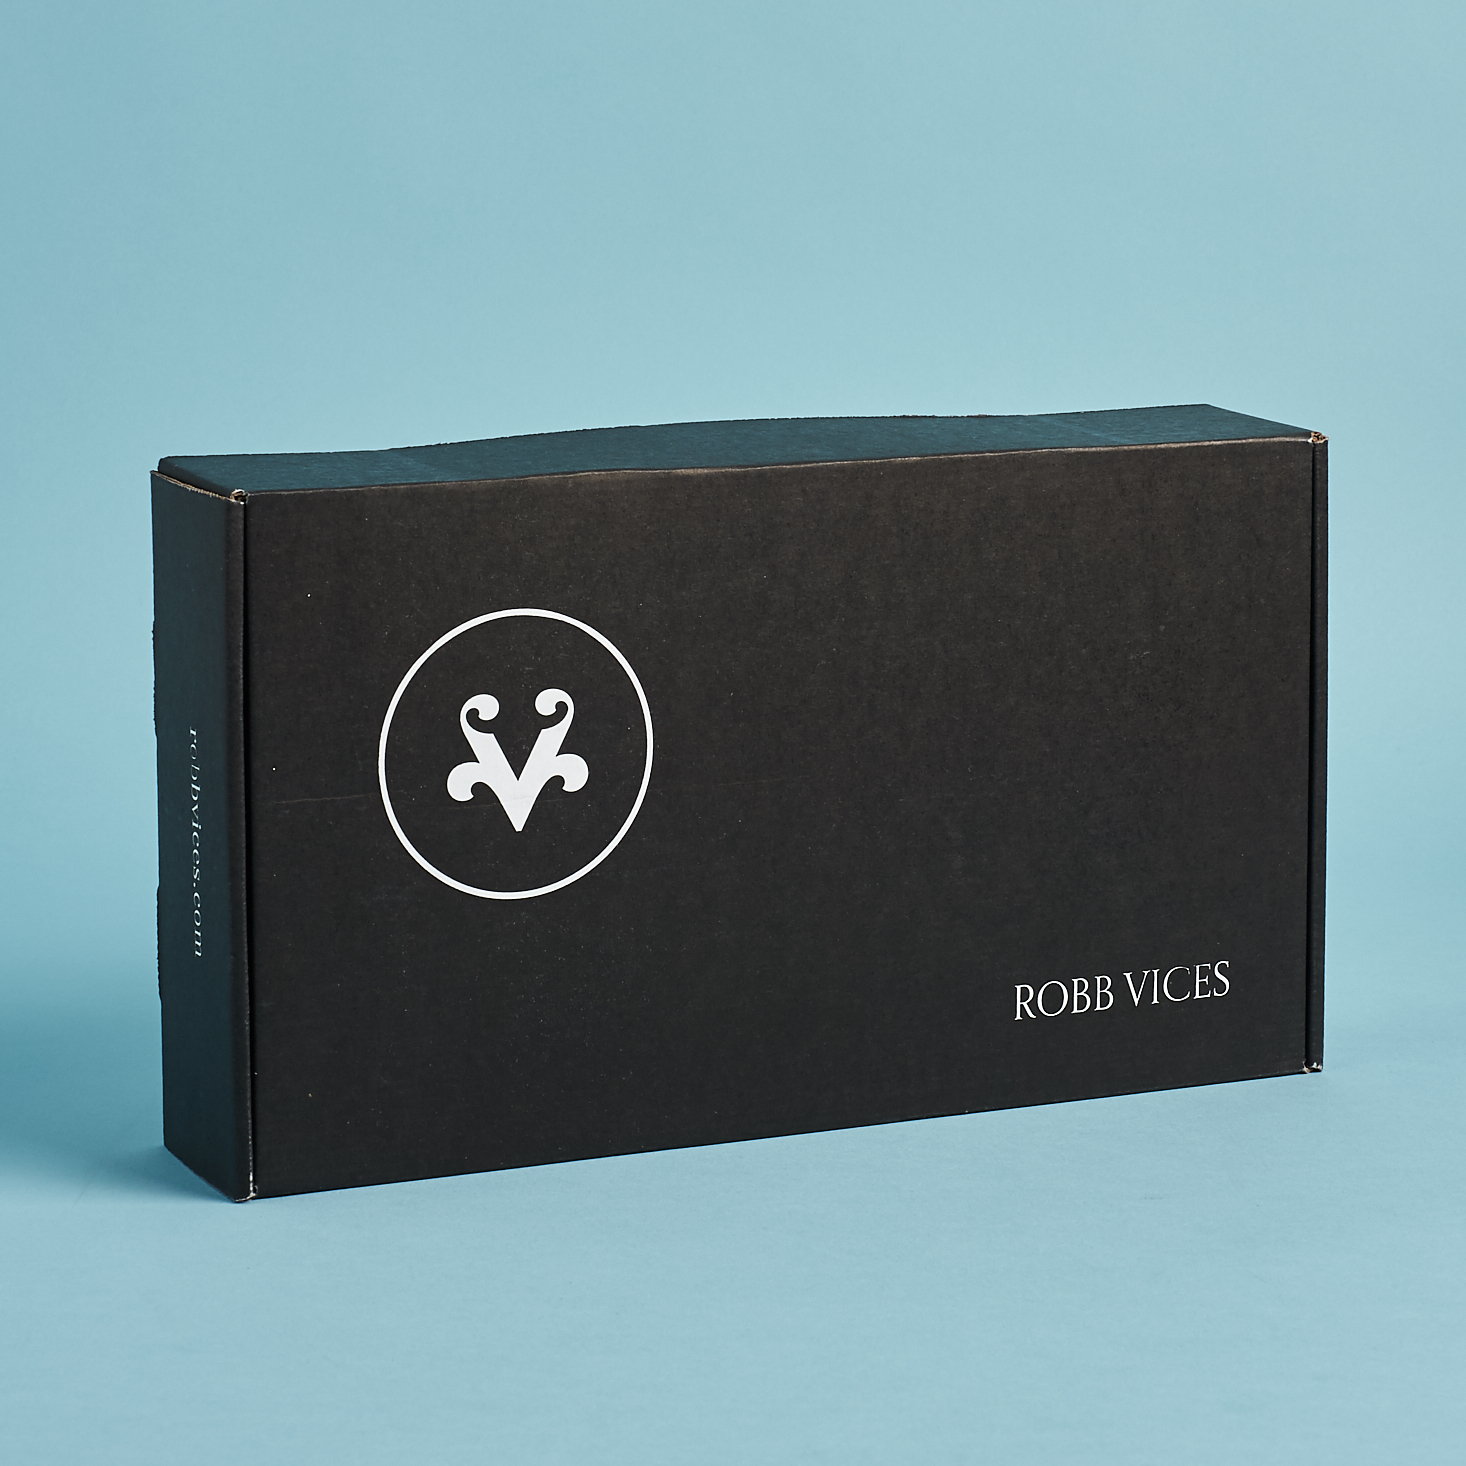 Robb Vices Subscription Box Review – June 2019